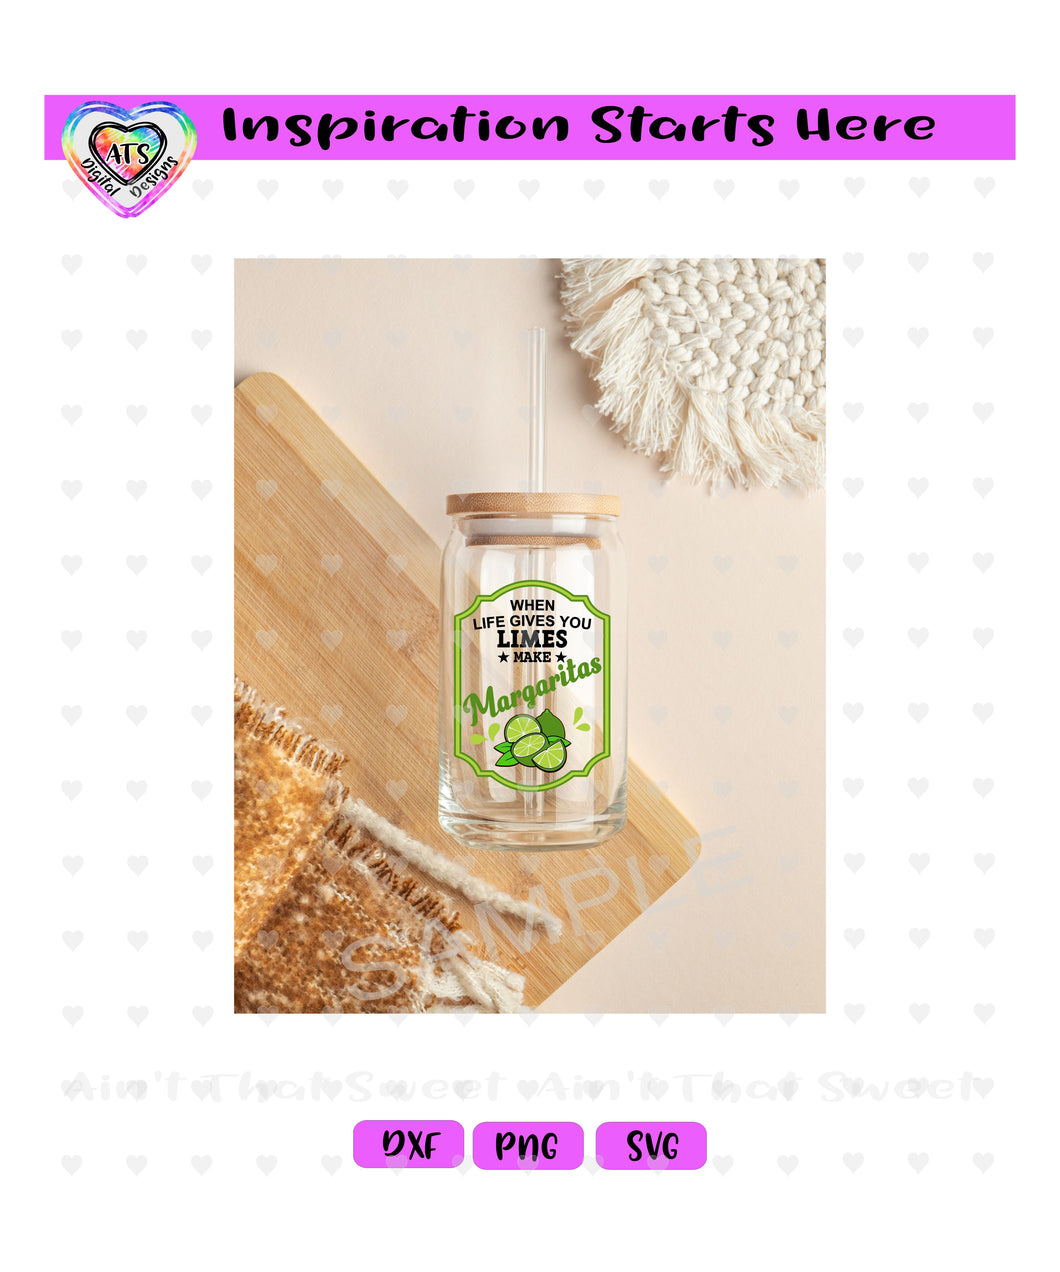 When Life Gives You Limes Make Margaritas - 16oz Libby Glass Can Tumbler - Transparent PNG SVG DXF - Silhouette, Cricut, ScanNCut